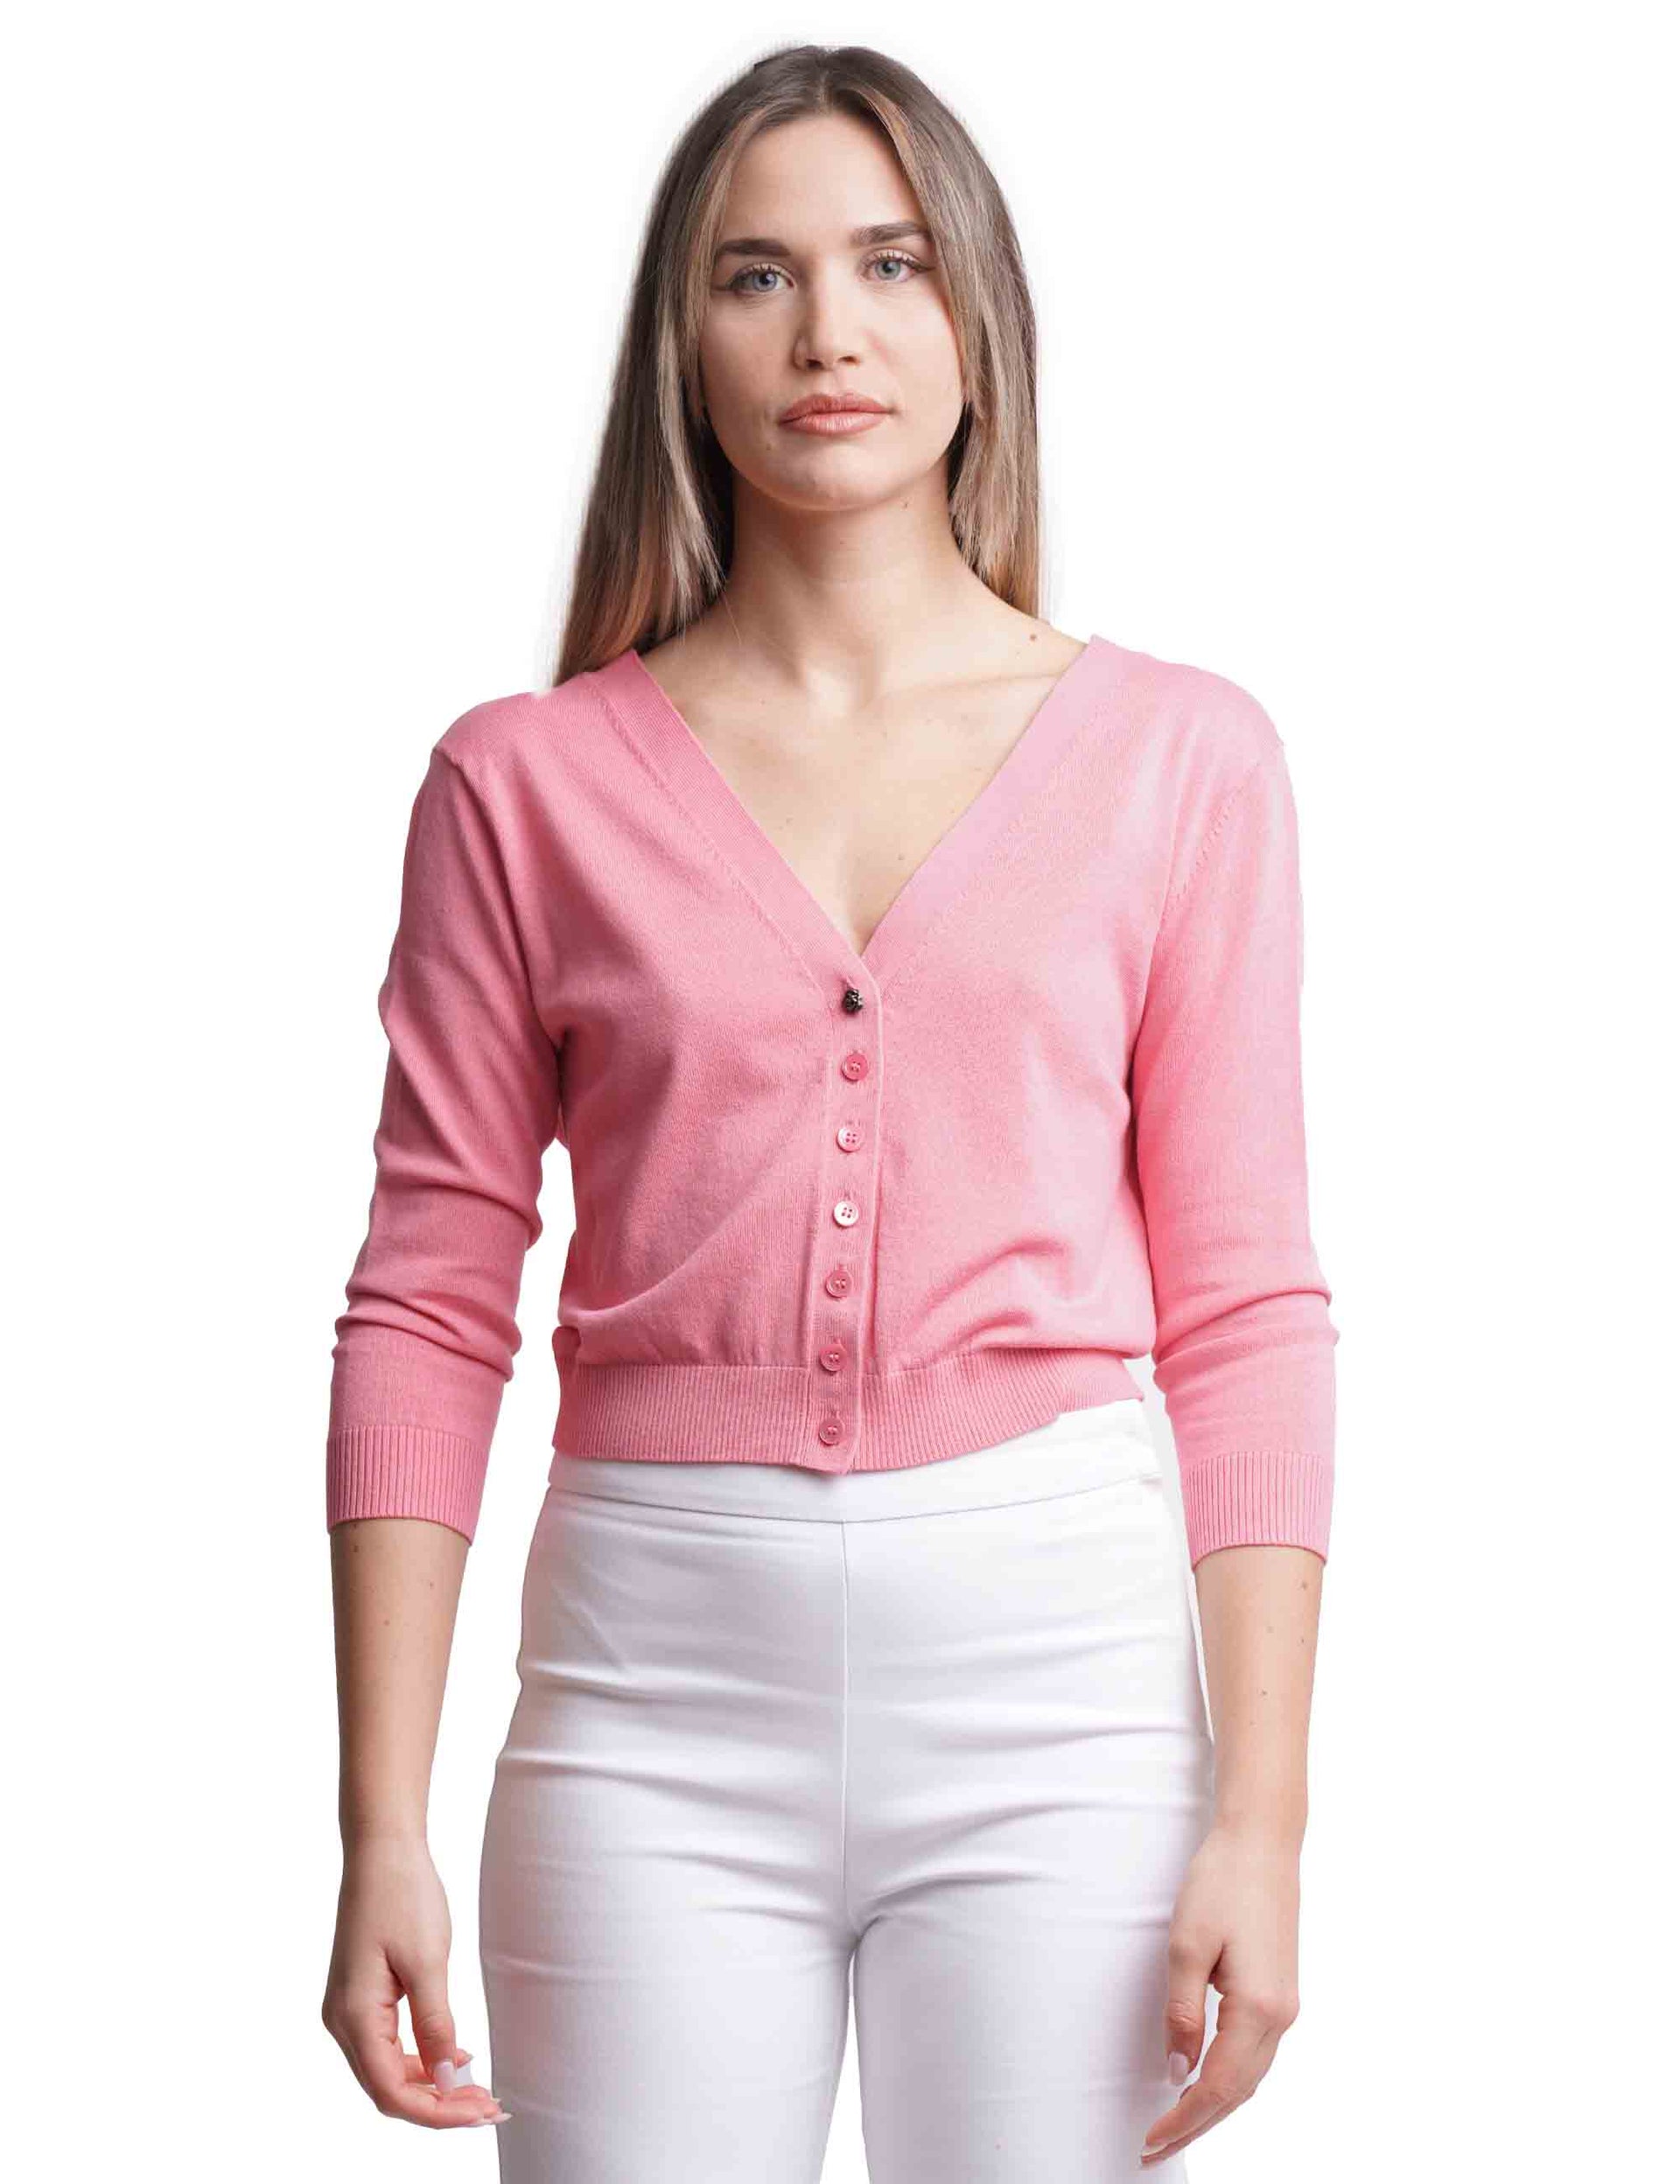 Smooth women's cardigan sweaters in pink cotton